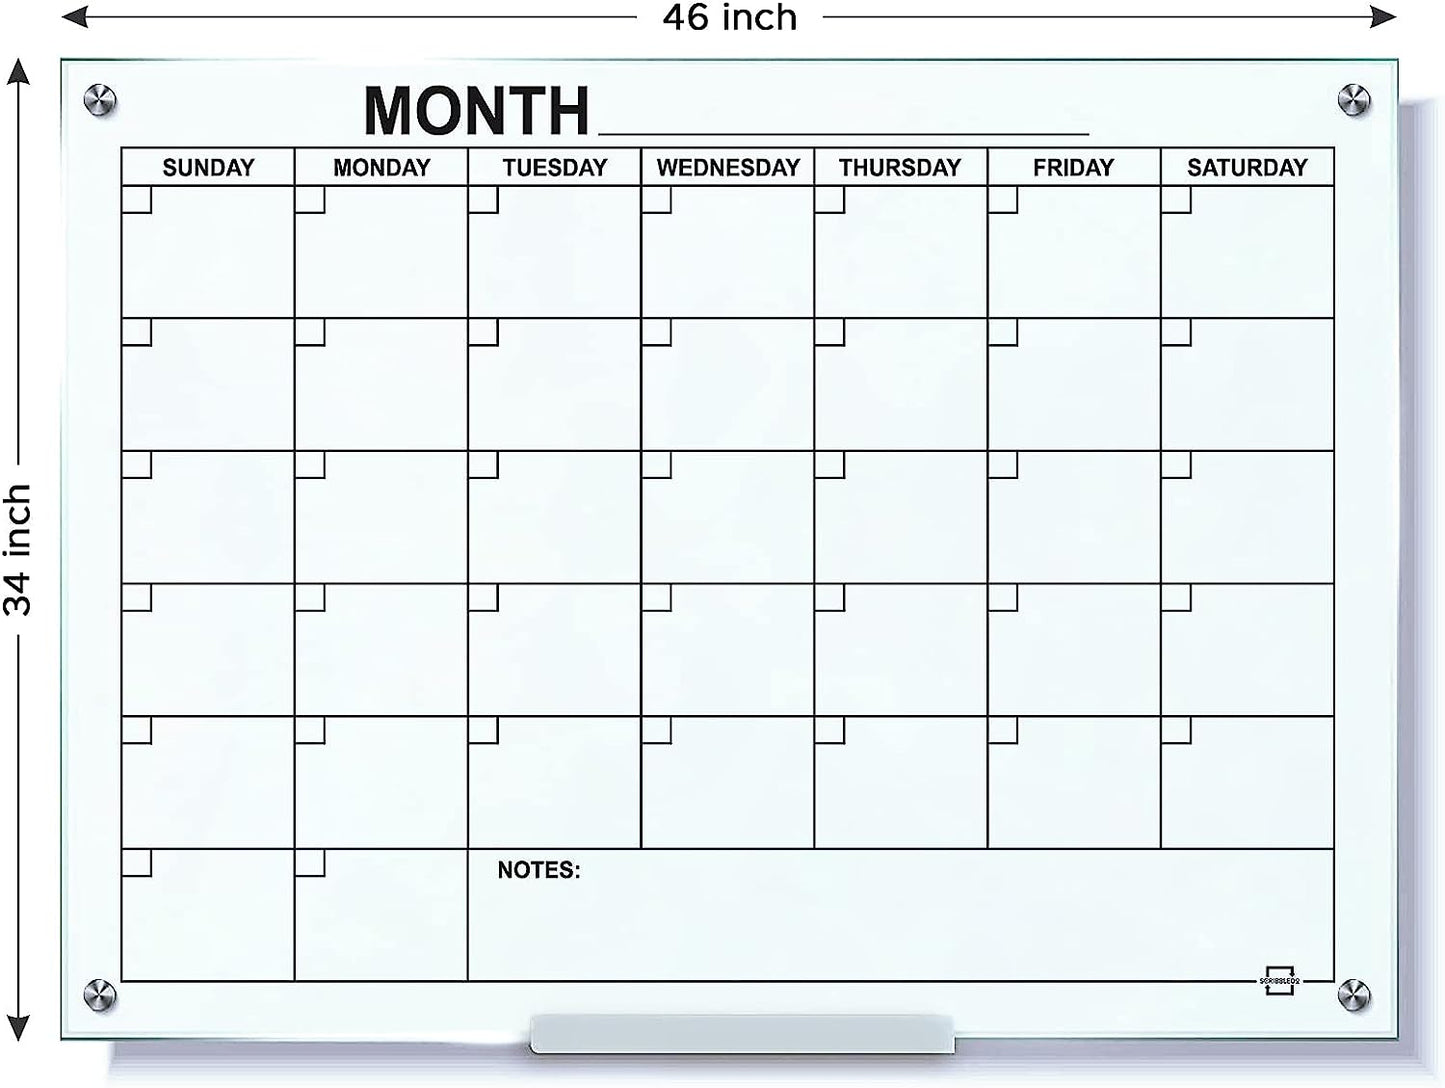 34x46 glass monthly planner wipe board with tray